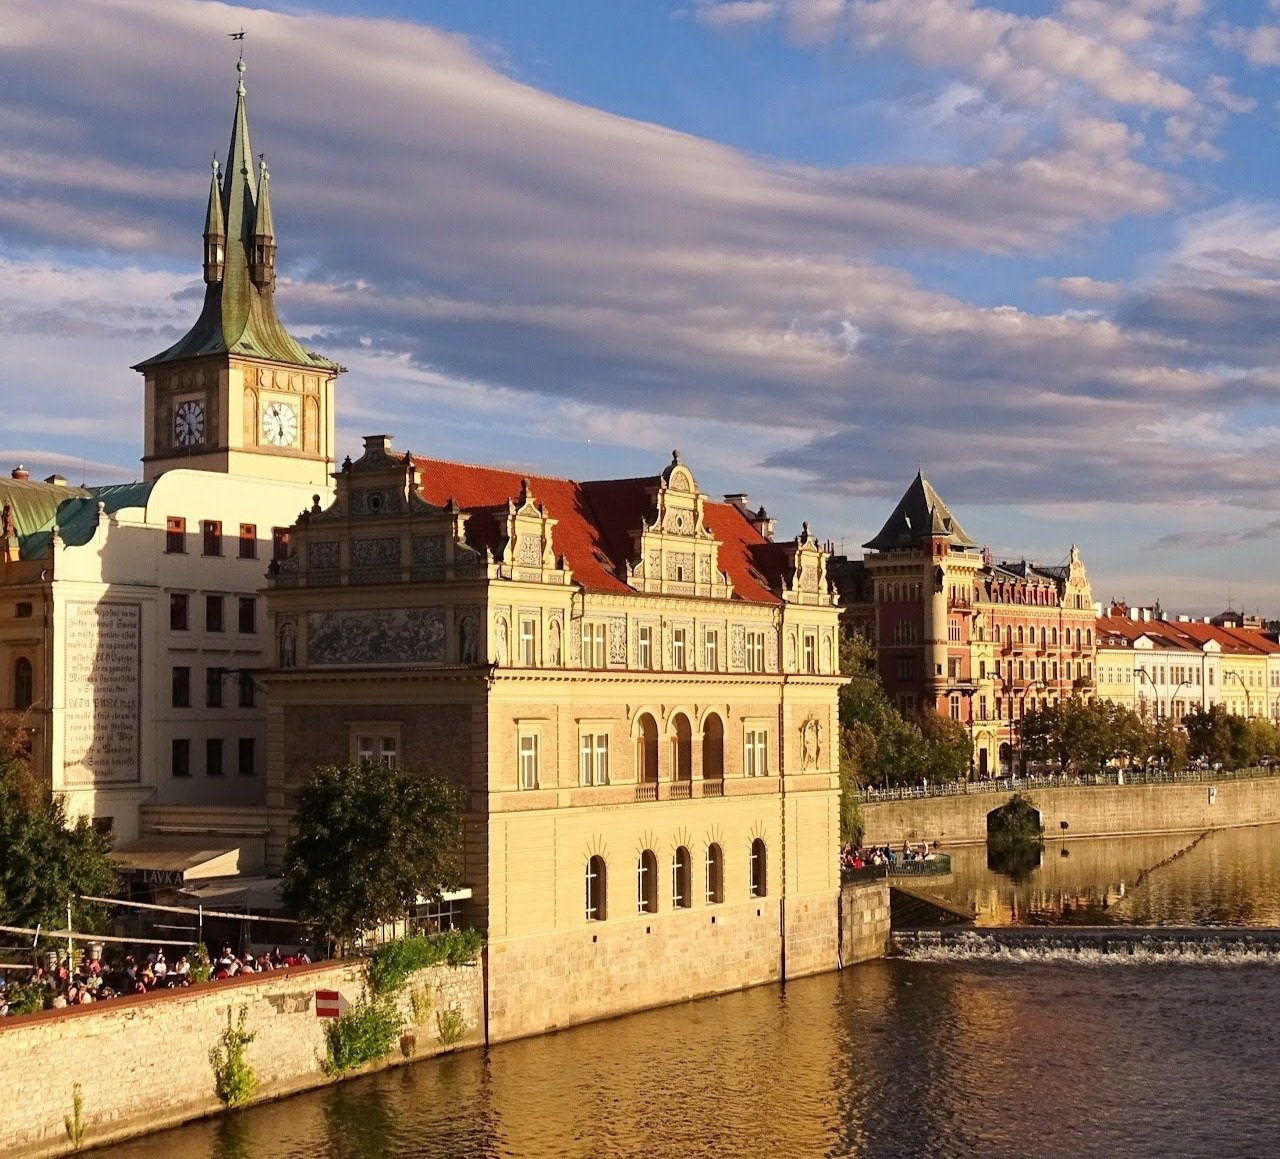 architecture-town-chateau-palace-city-river-canal-cityscape-evening-reflection-castle-landmark-prague-tourism-waterway-historically-praha-czech-republic-moldova-tours-historical-city-prague-castle-water-castle-641872.jpg